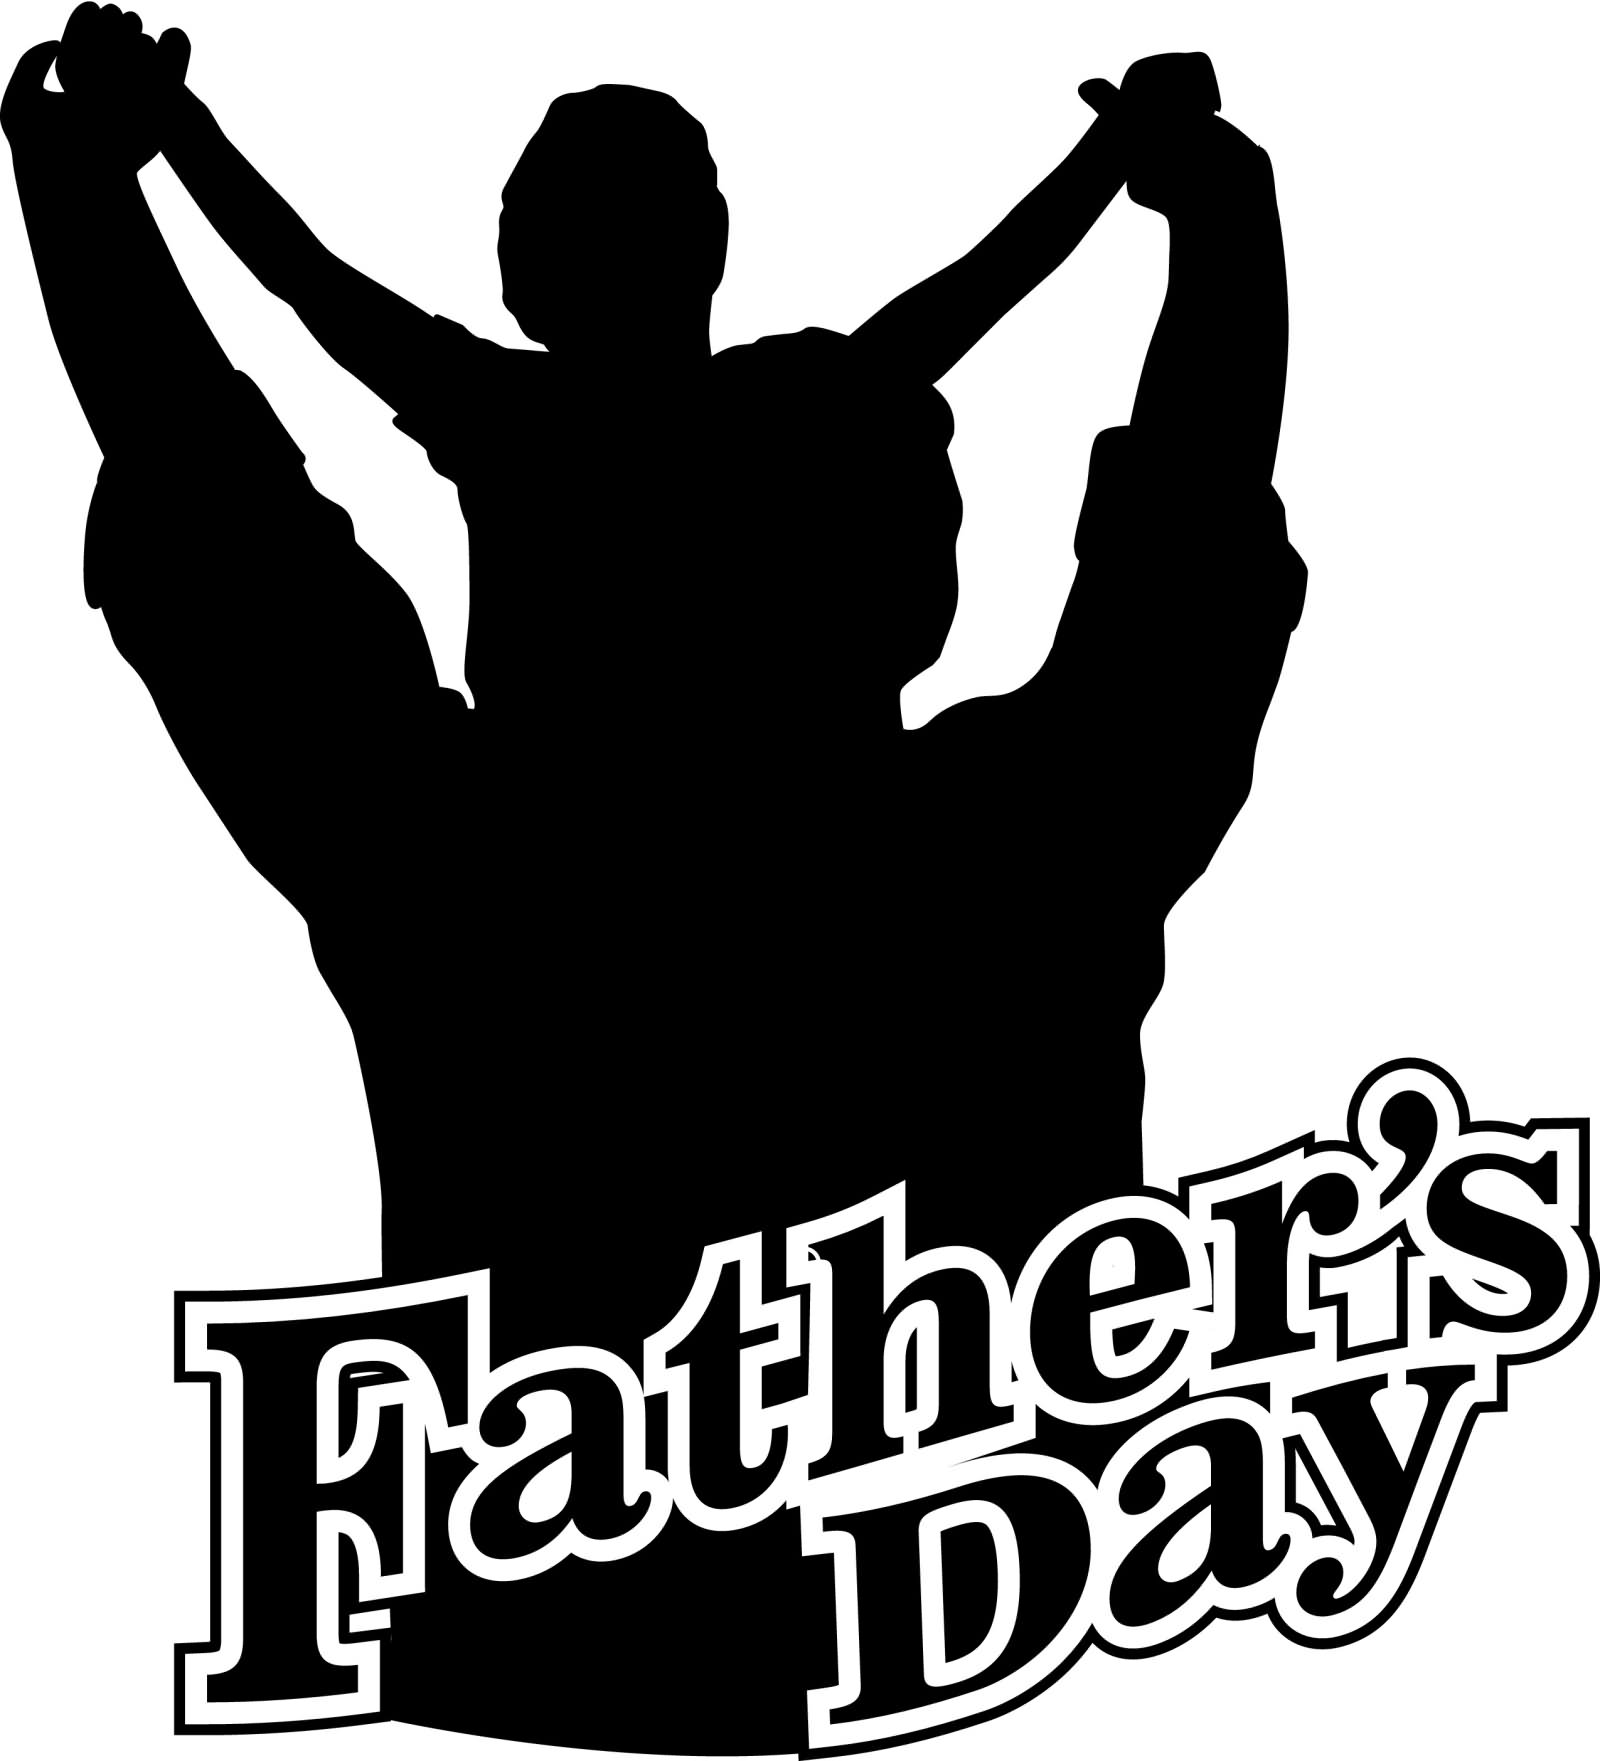 Father's Day Greetings Clipart